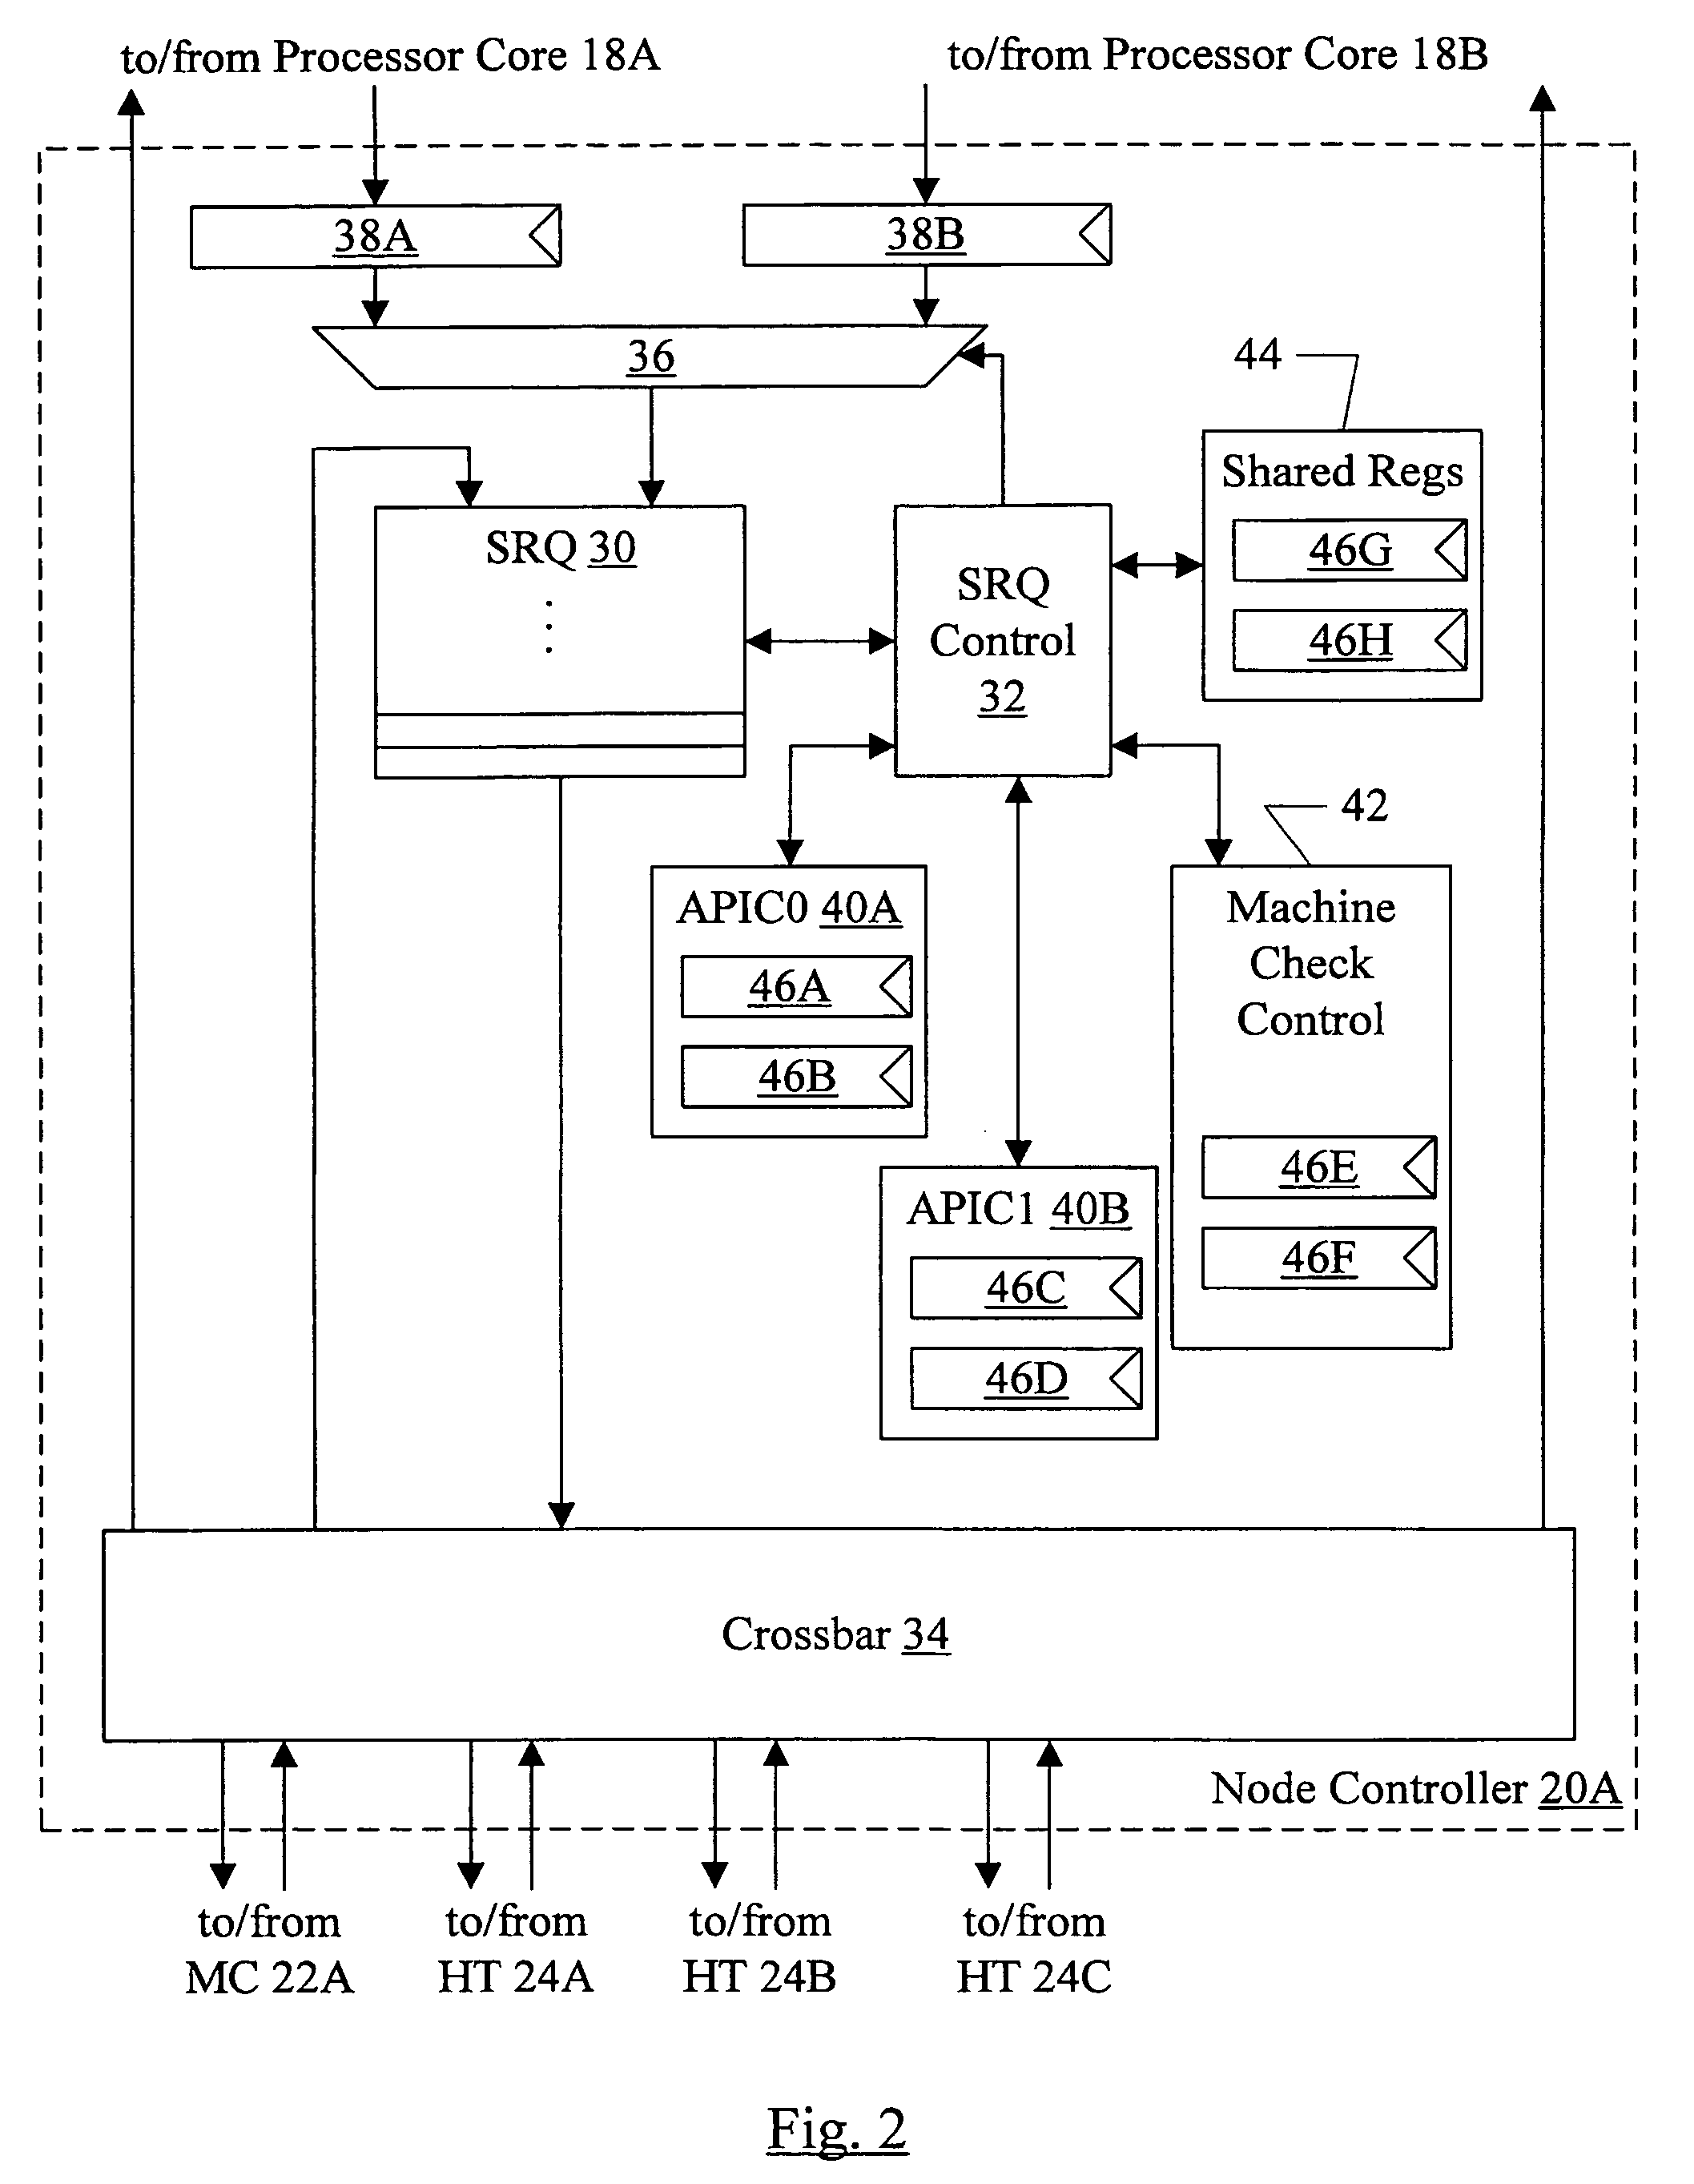 Shared resources in a chip multiprocessor